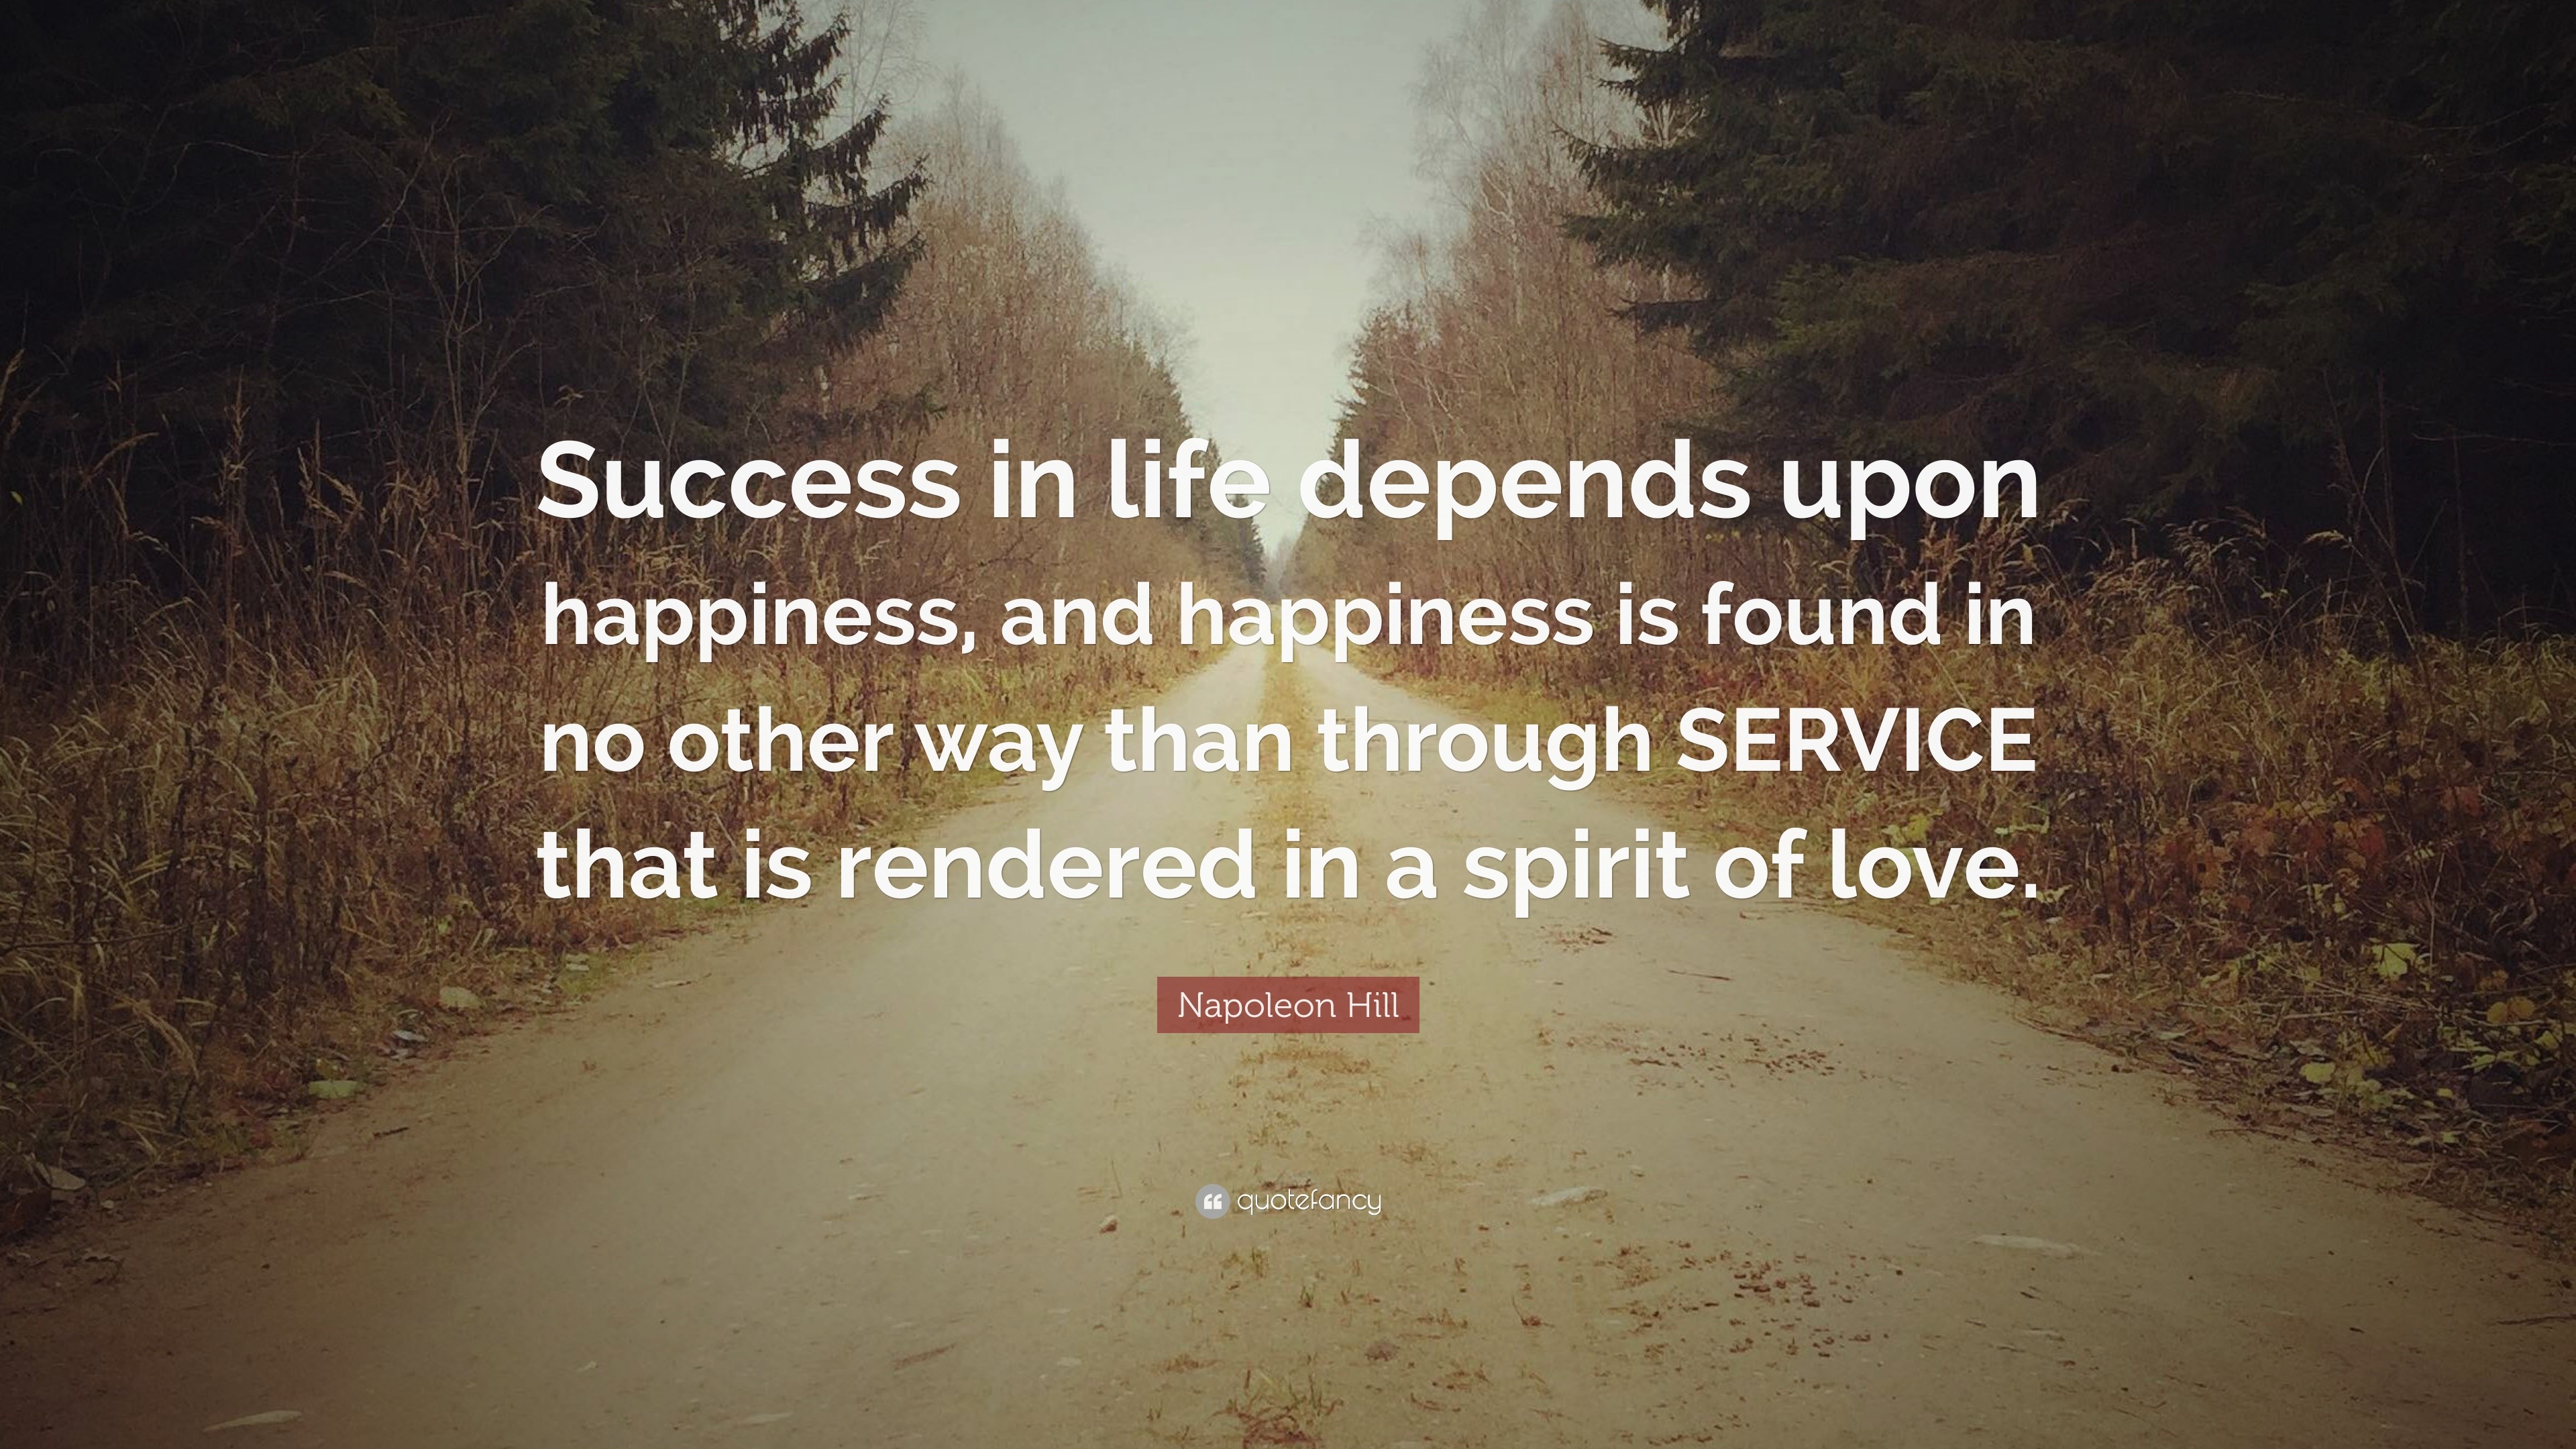 Napoleon Hill Quote: “Success in life depends upon happiness, and ...